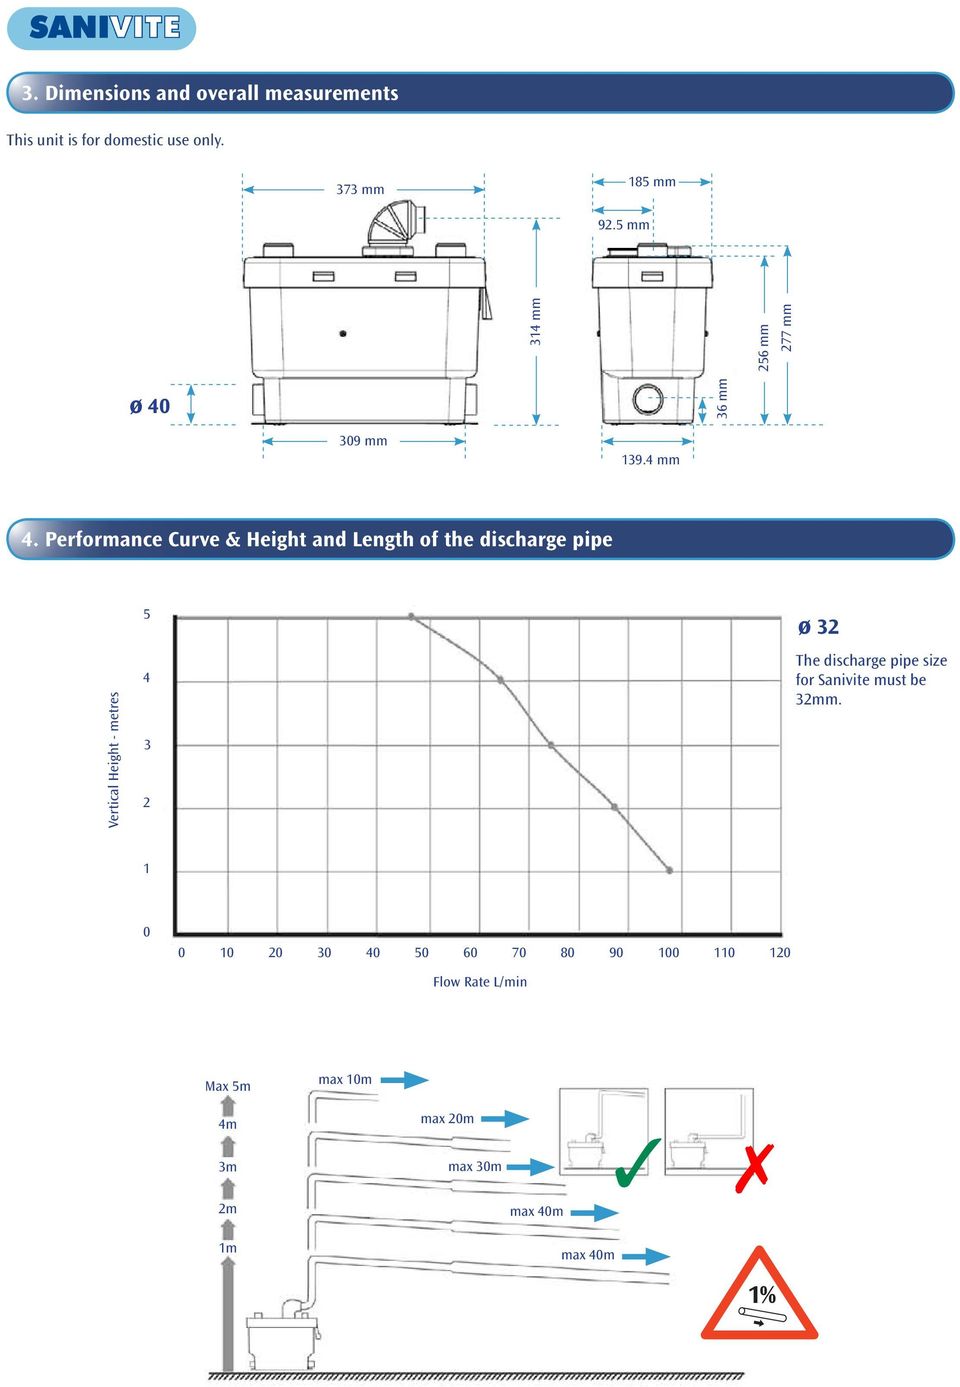 Performance Curve & Height and Length of the discharge pipe Vertical Height - metres 5 4 Metres 3 2 ø 32